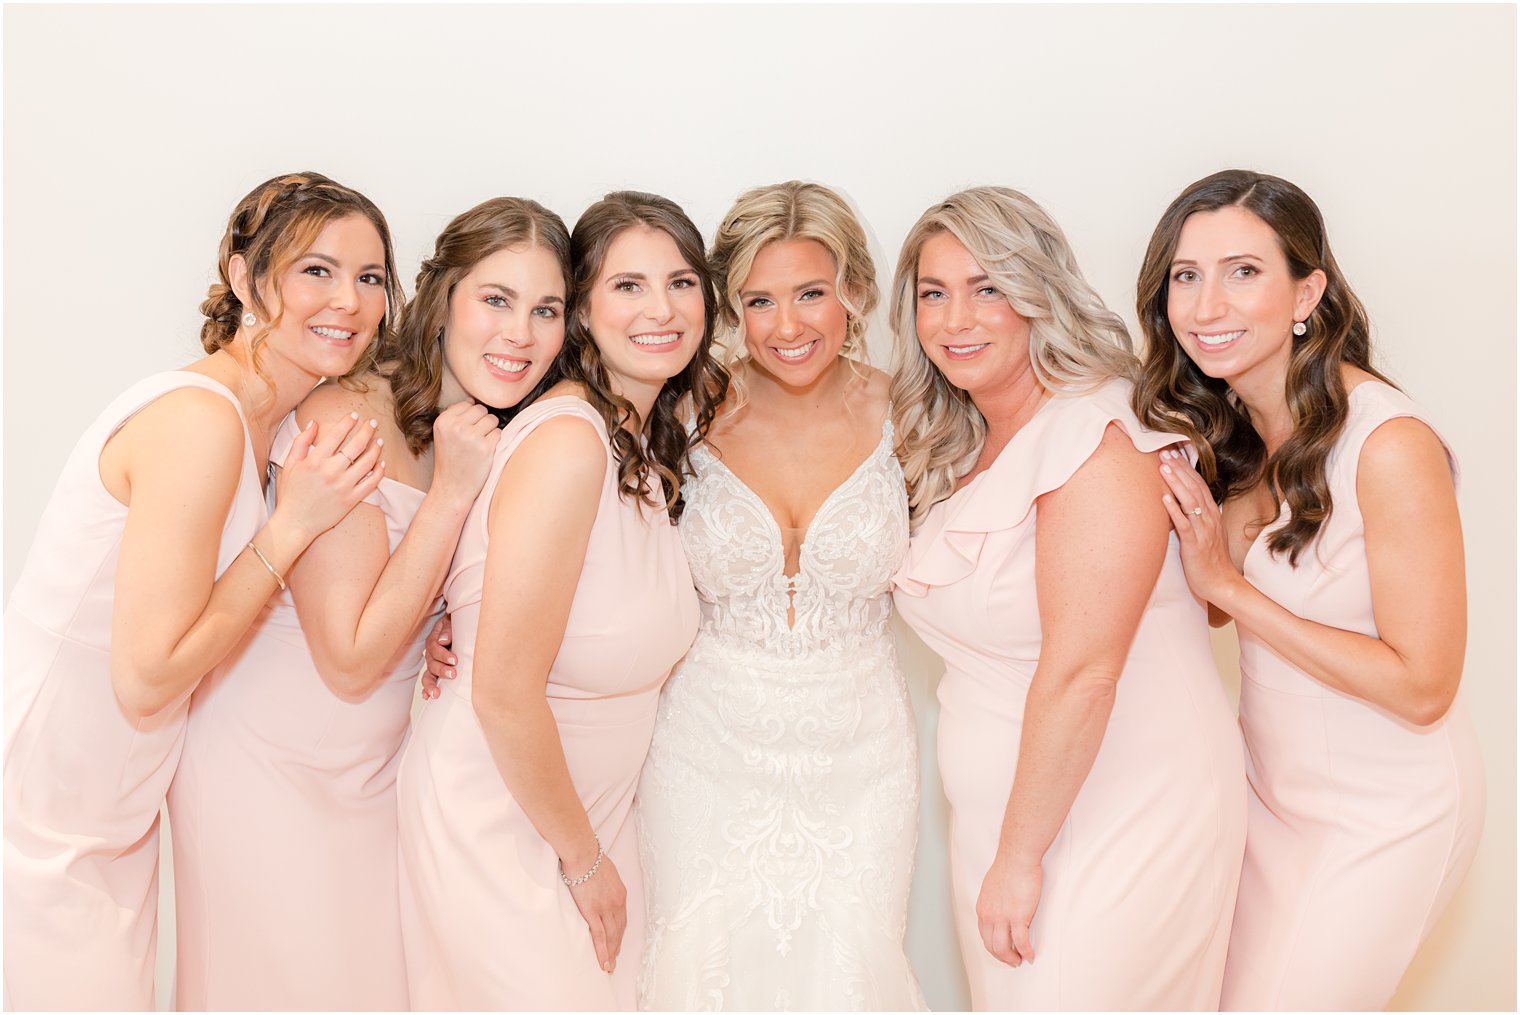 bride and bridesmaids group photo taken at Renault Winery in Egg Harbor Twp NJ